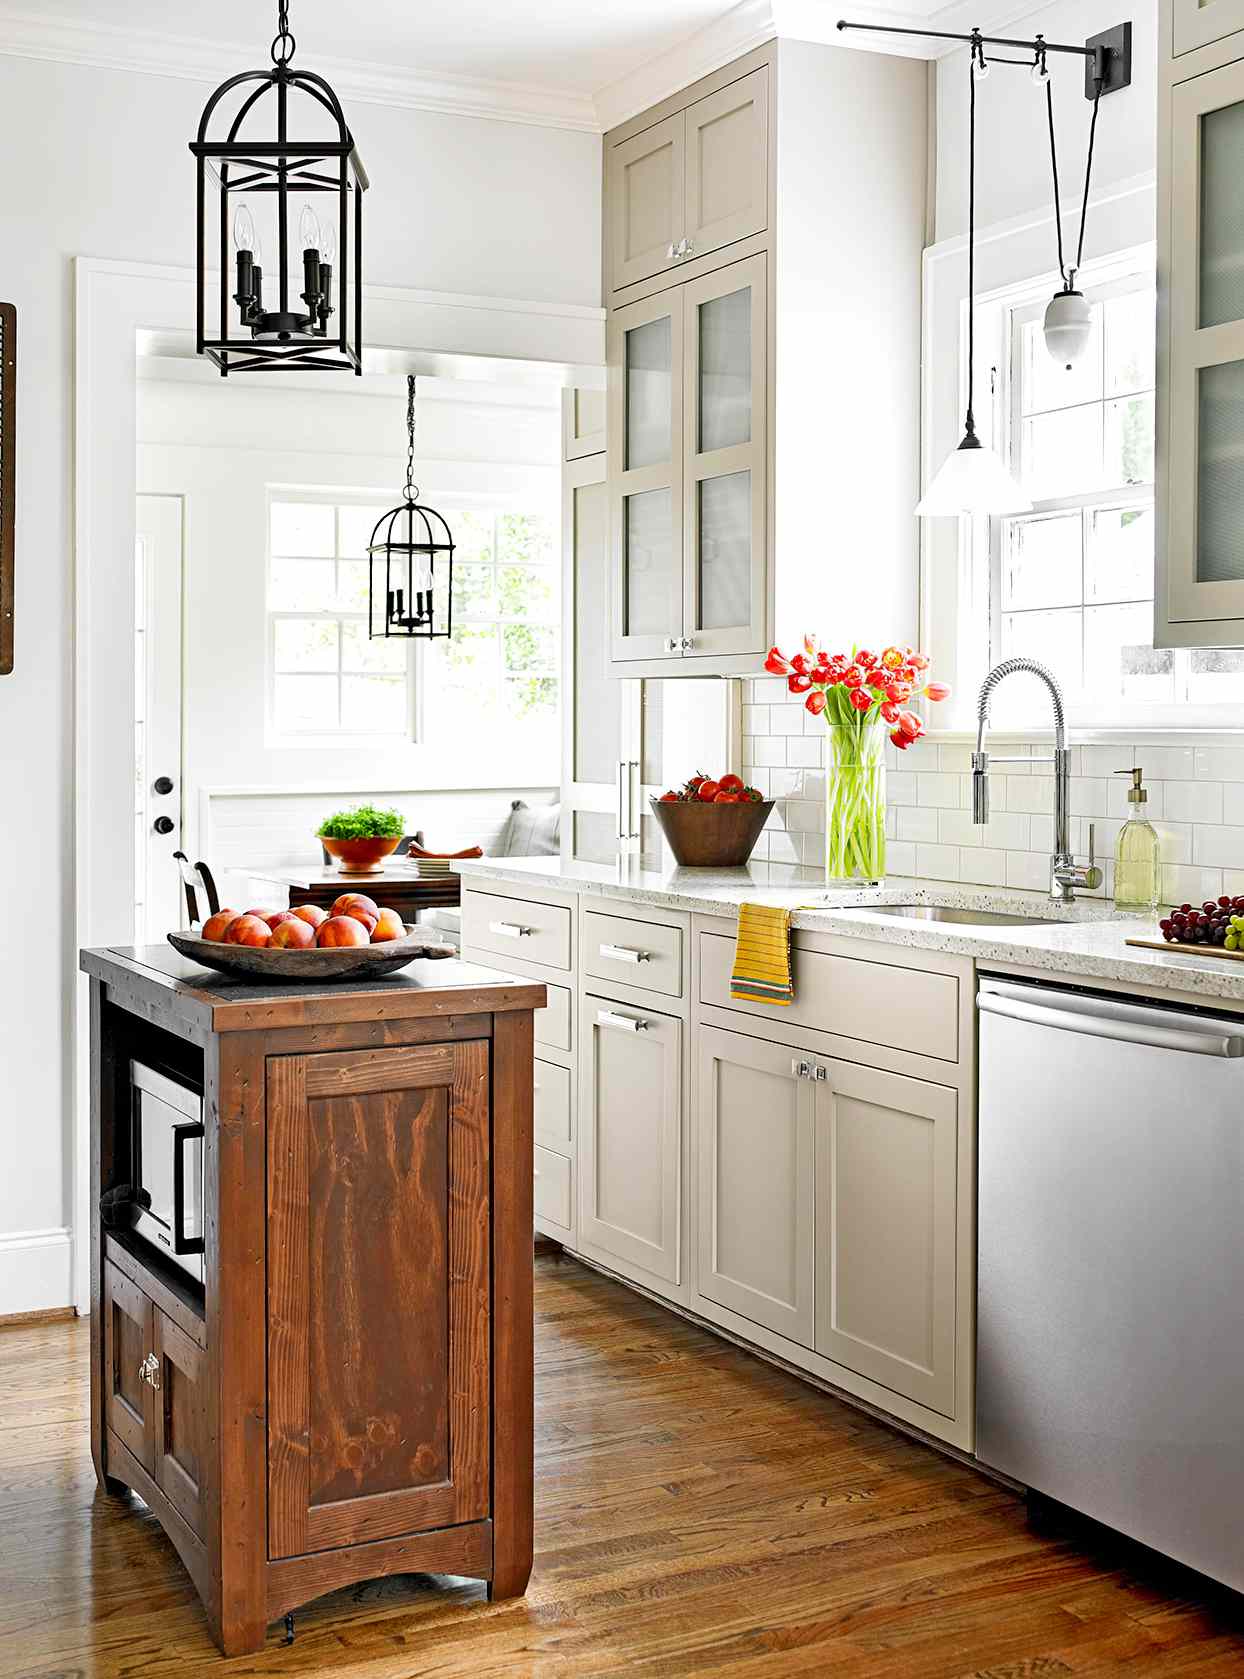 20 Small Kitchen Color Ideas for a Big Boost of Style   Better ...